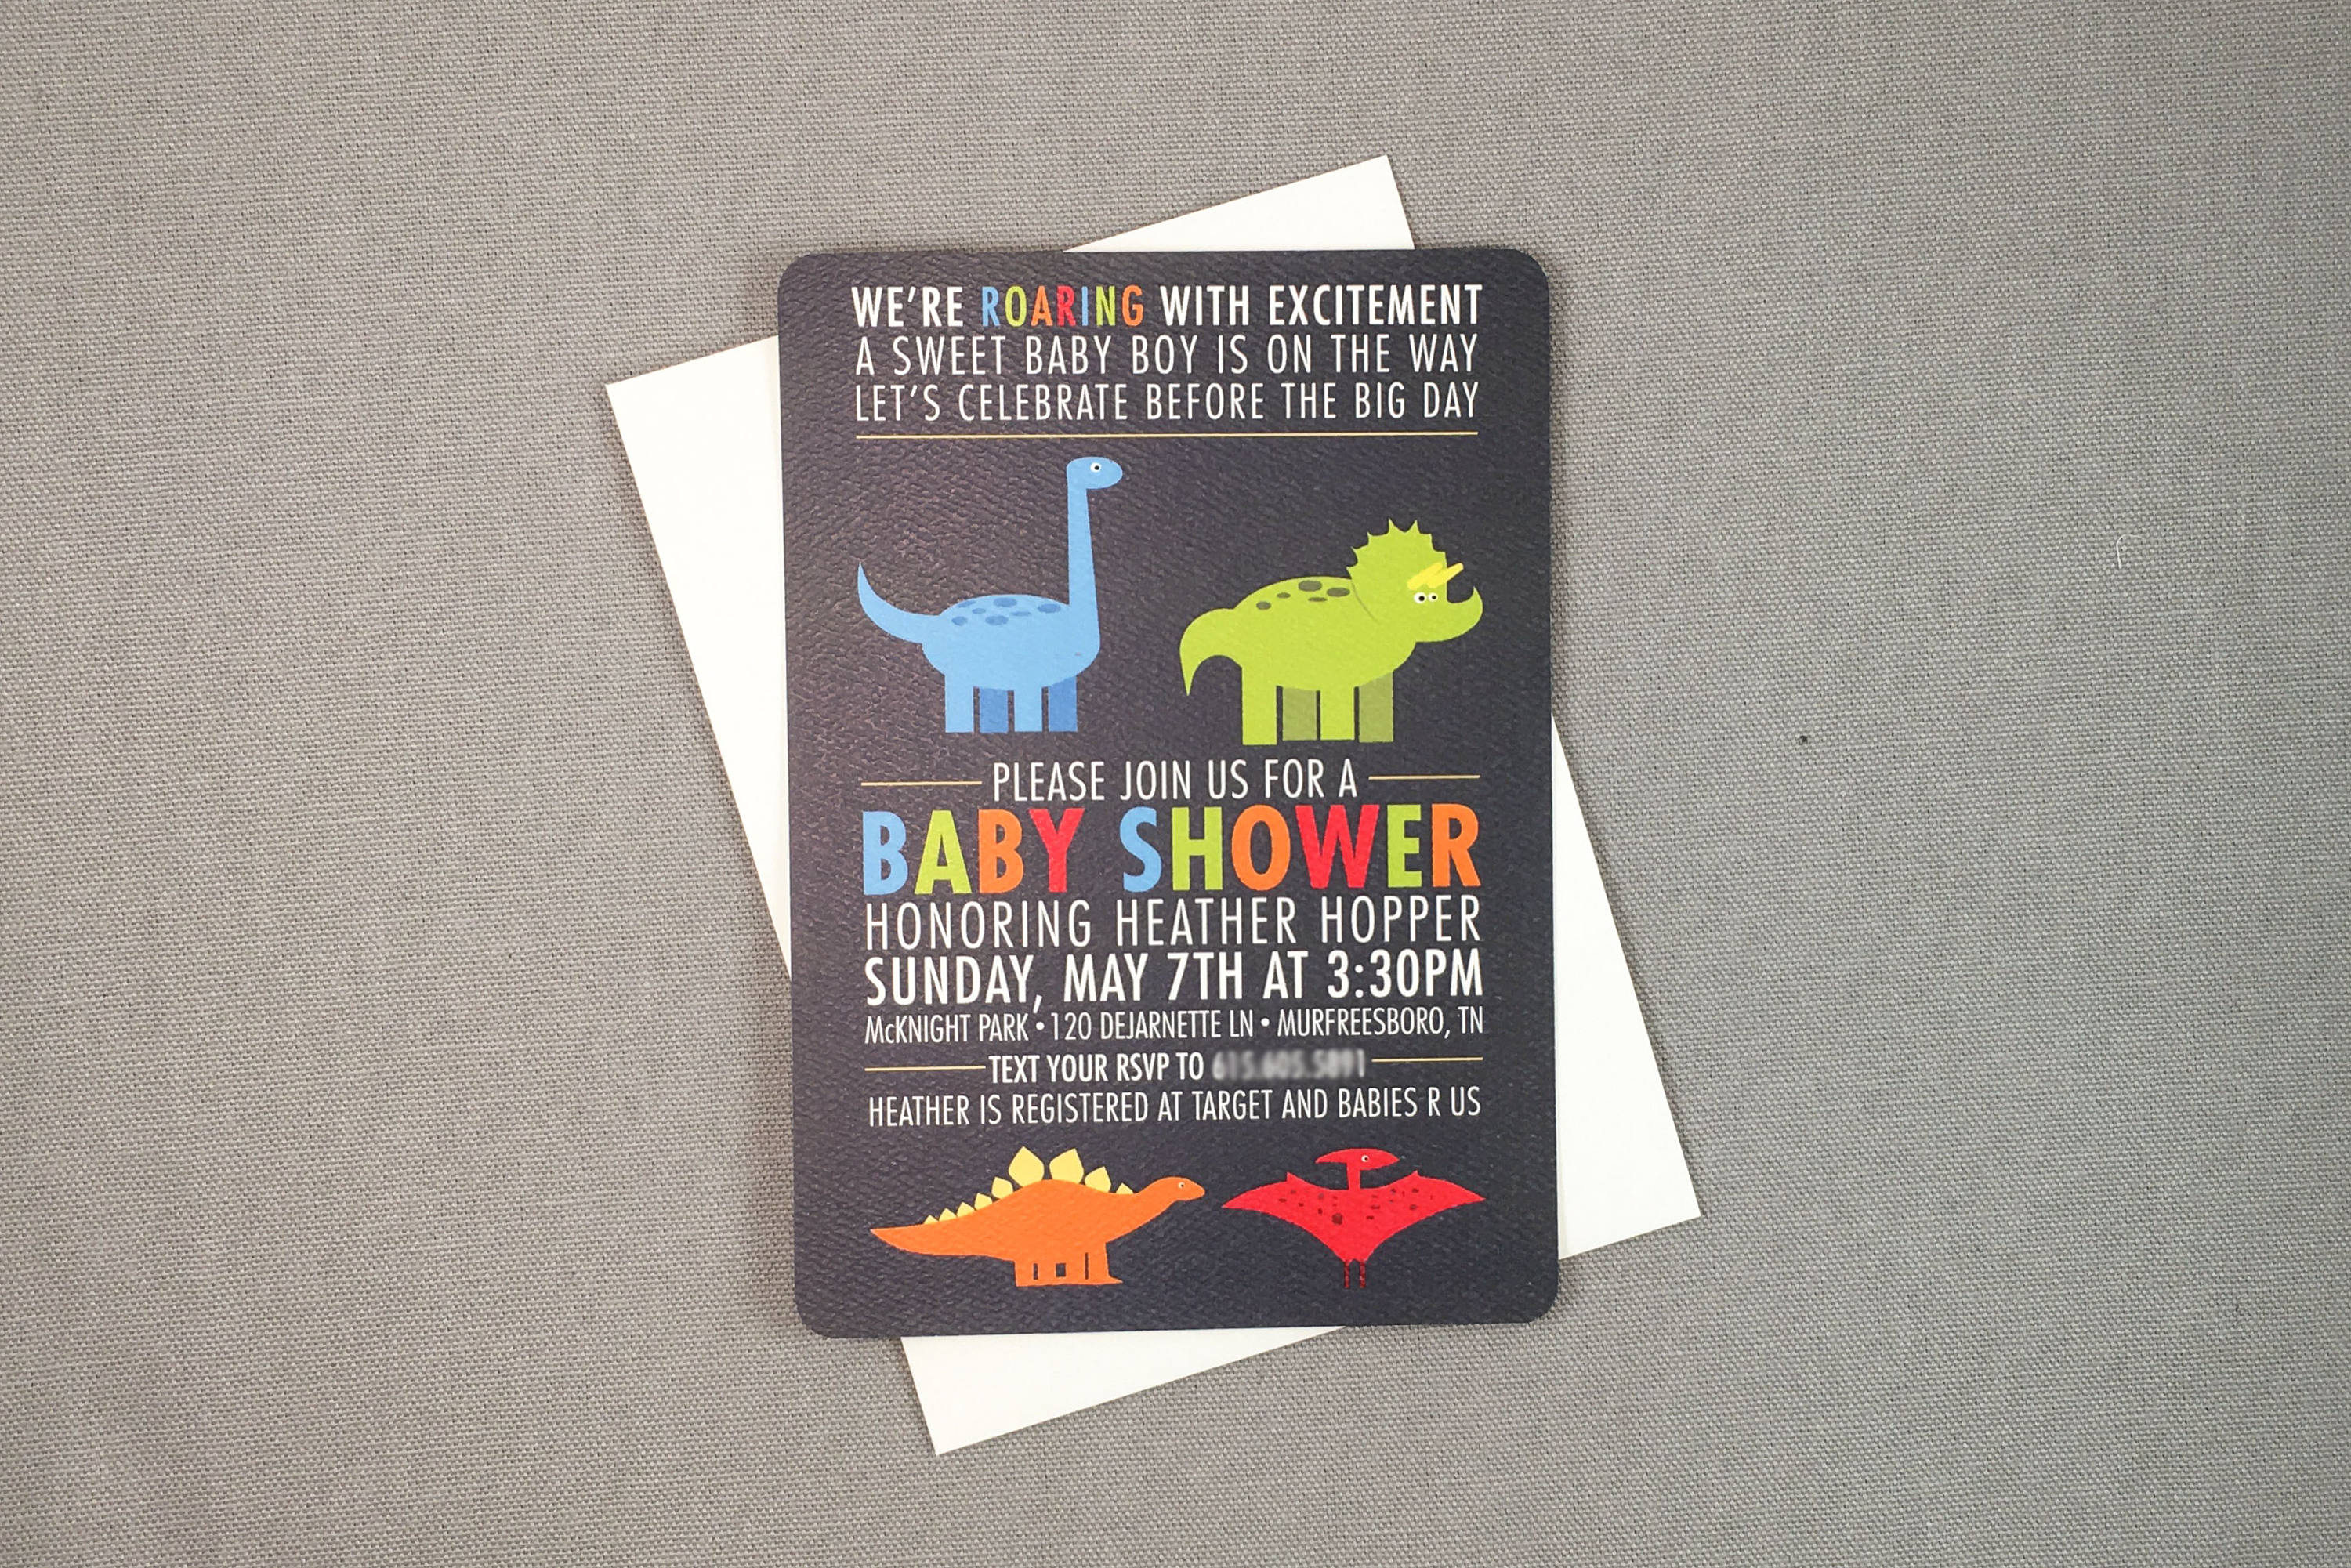 Dinosaur Themed Baby Shower Invitation // Roaring with Excitement Baby Shower Invite // DIY // Printable // Template